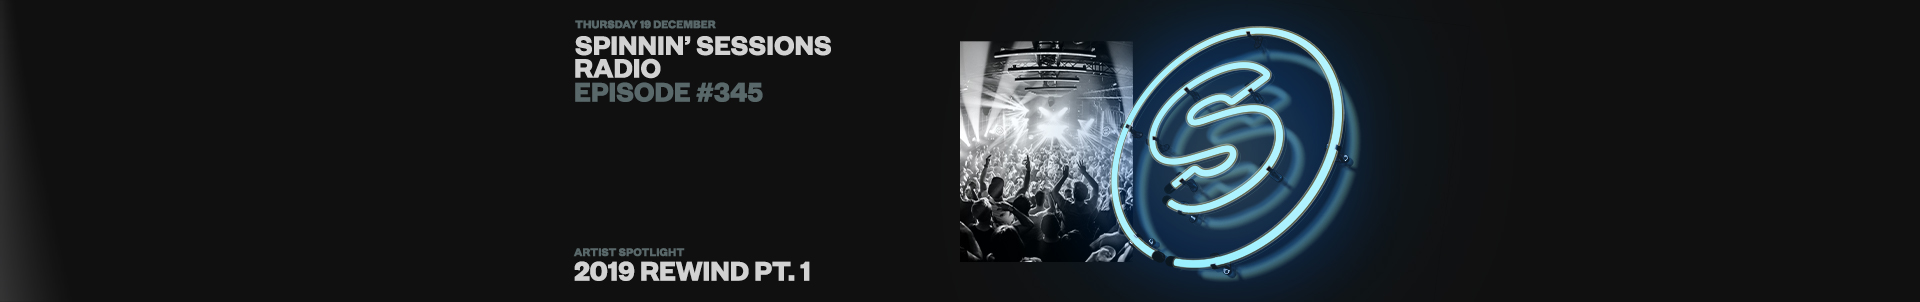 Spinnin' Sessions looks back at Spinnin's 2019 highlights